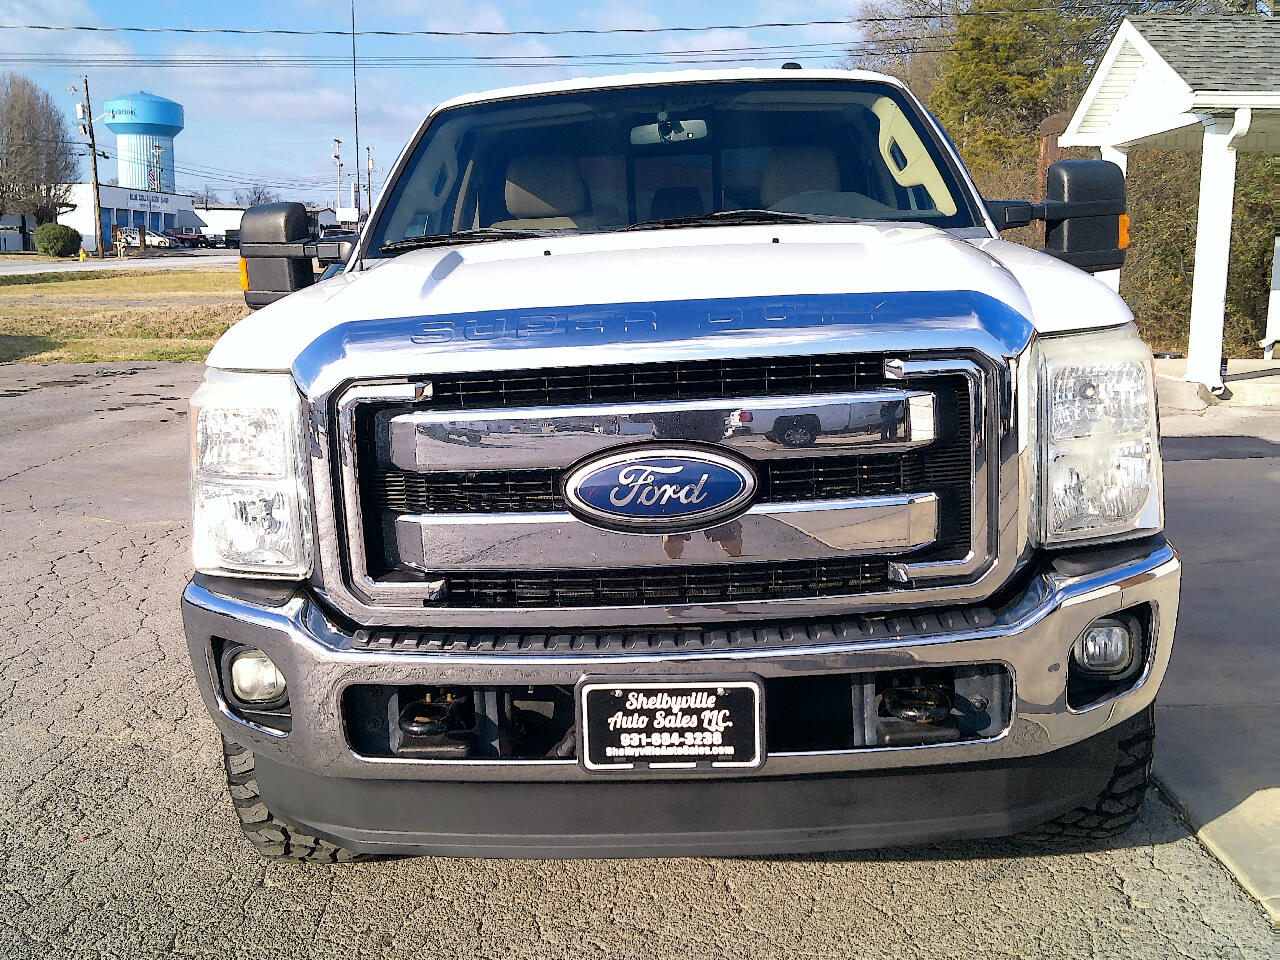 2011 Ford Super Duty F-250 NICE CLEAN TRUCK4WDLEATHERHEATED AND COOLED SEATSNEW TIRES